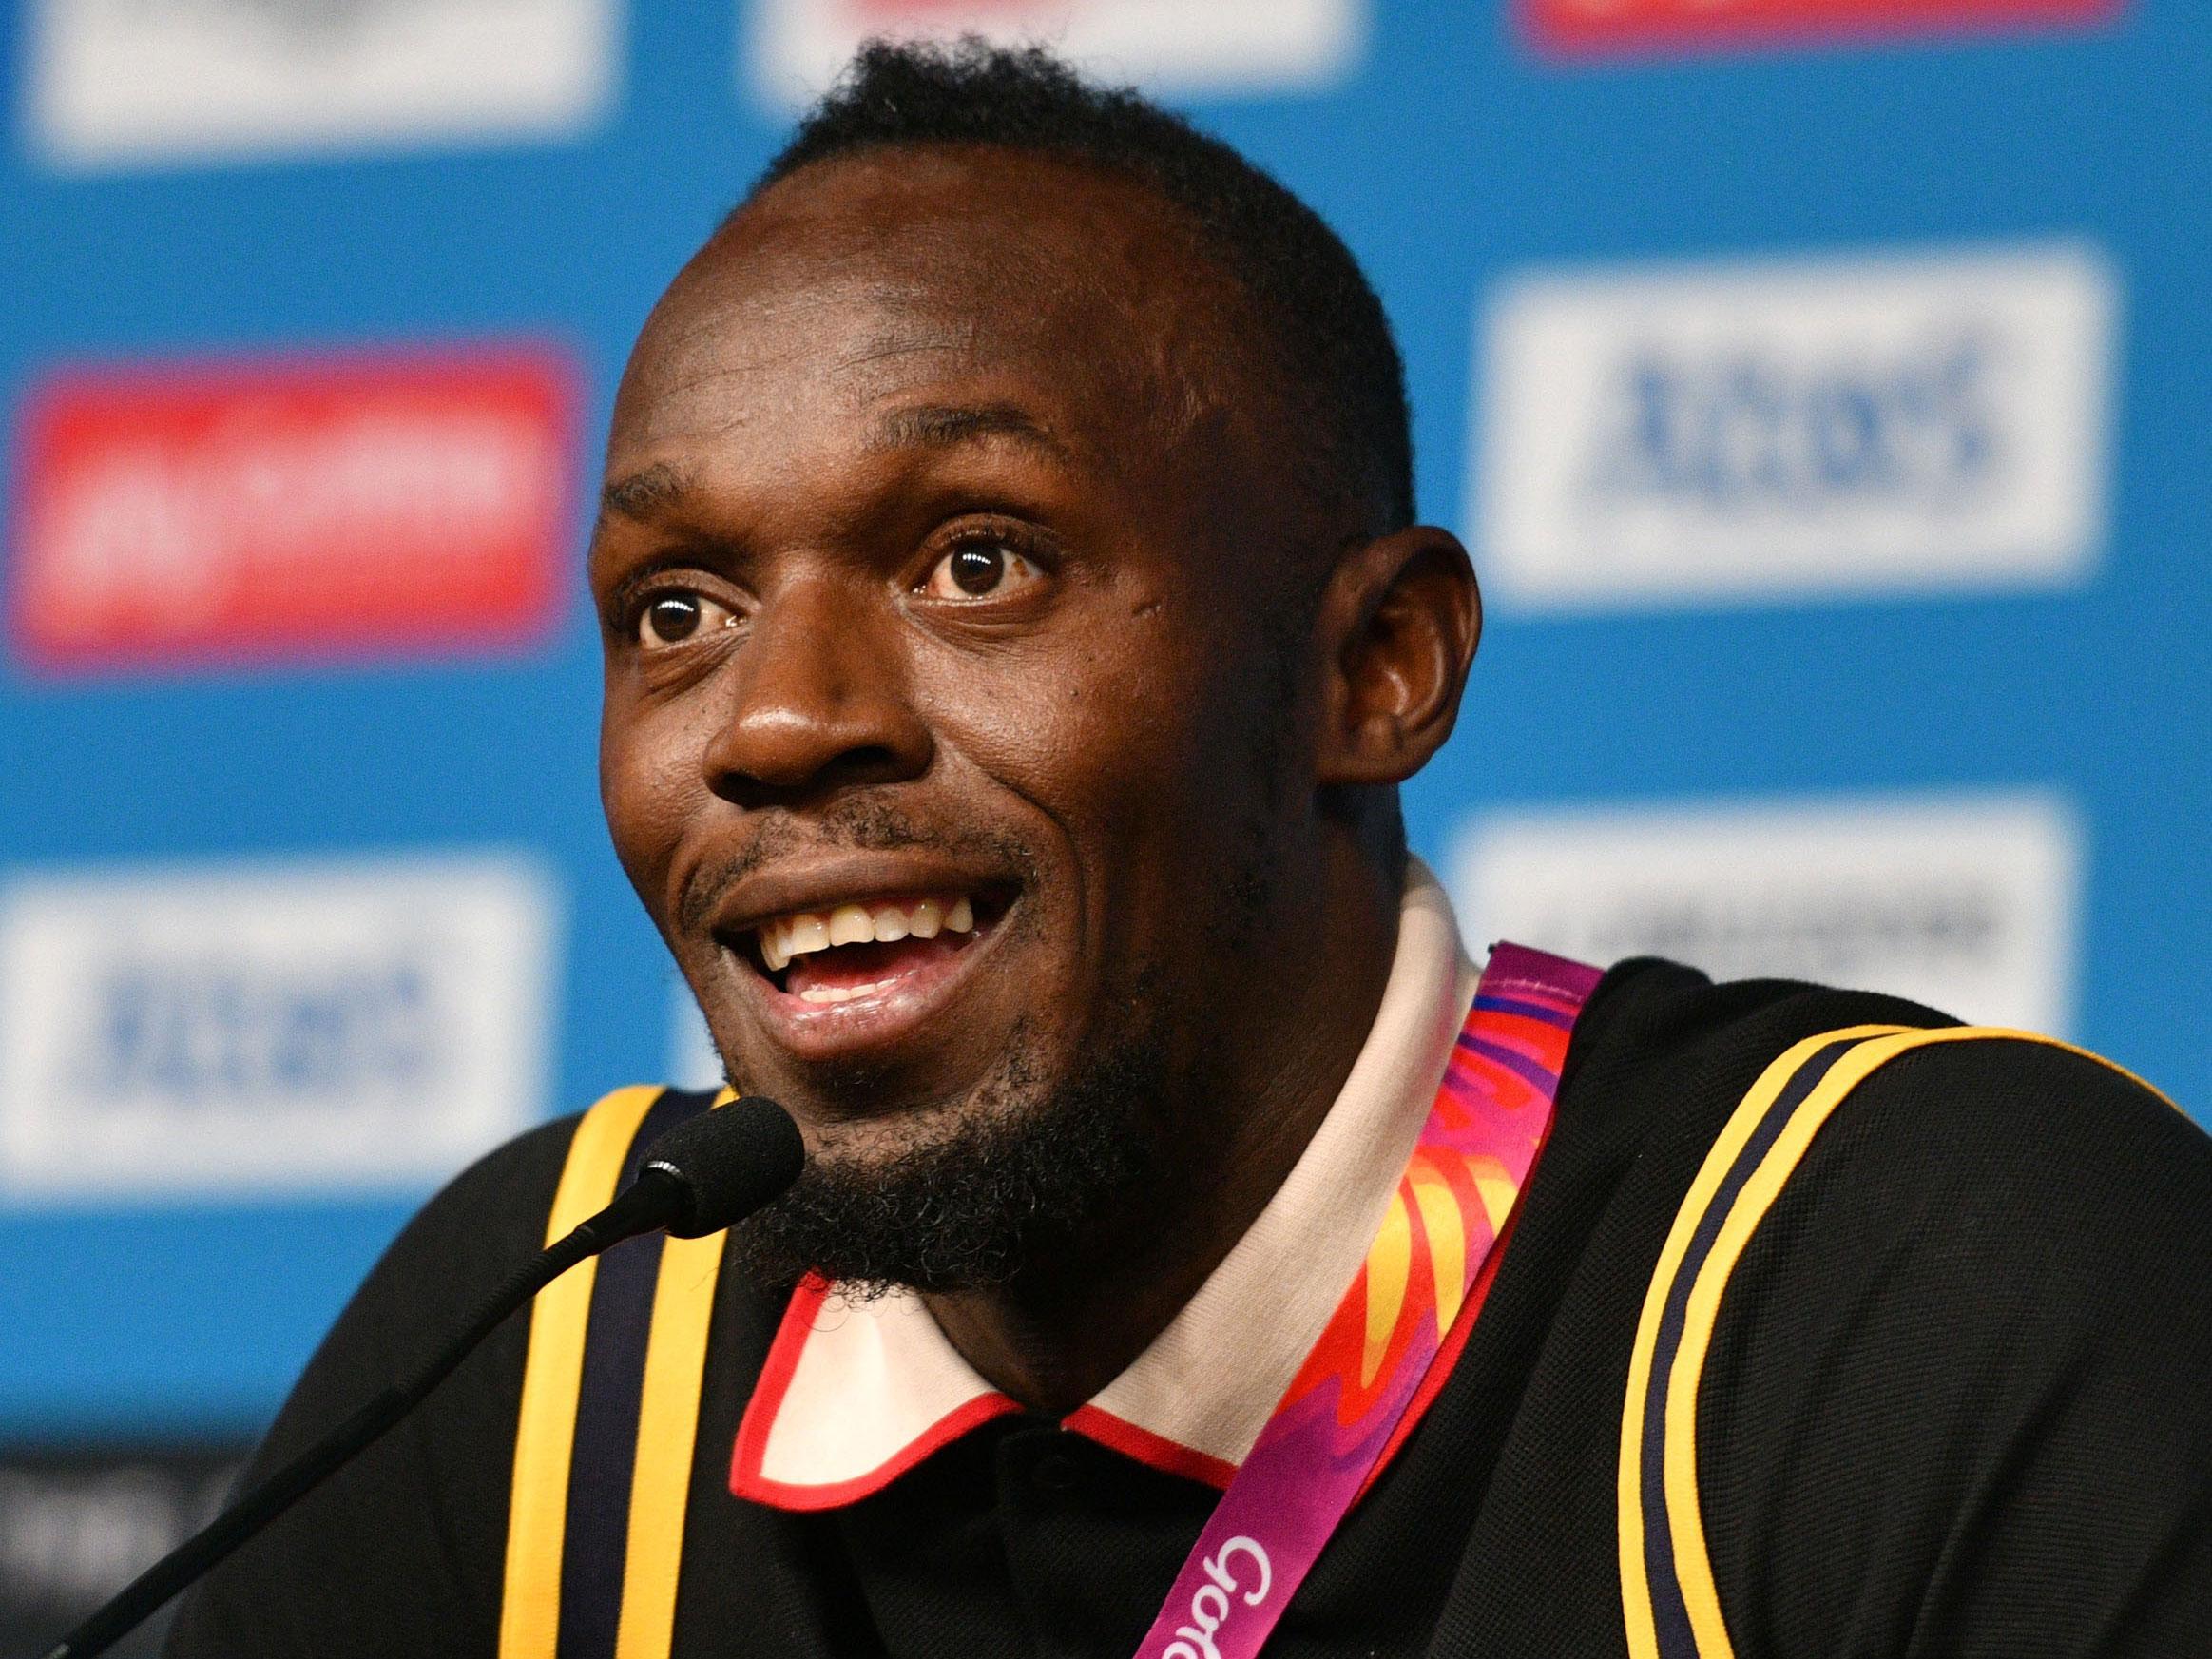 Commonwealth Games 2018: Usain Bolt promises to make fun of Yohan Blake after missing out on 100m gold